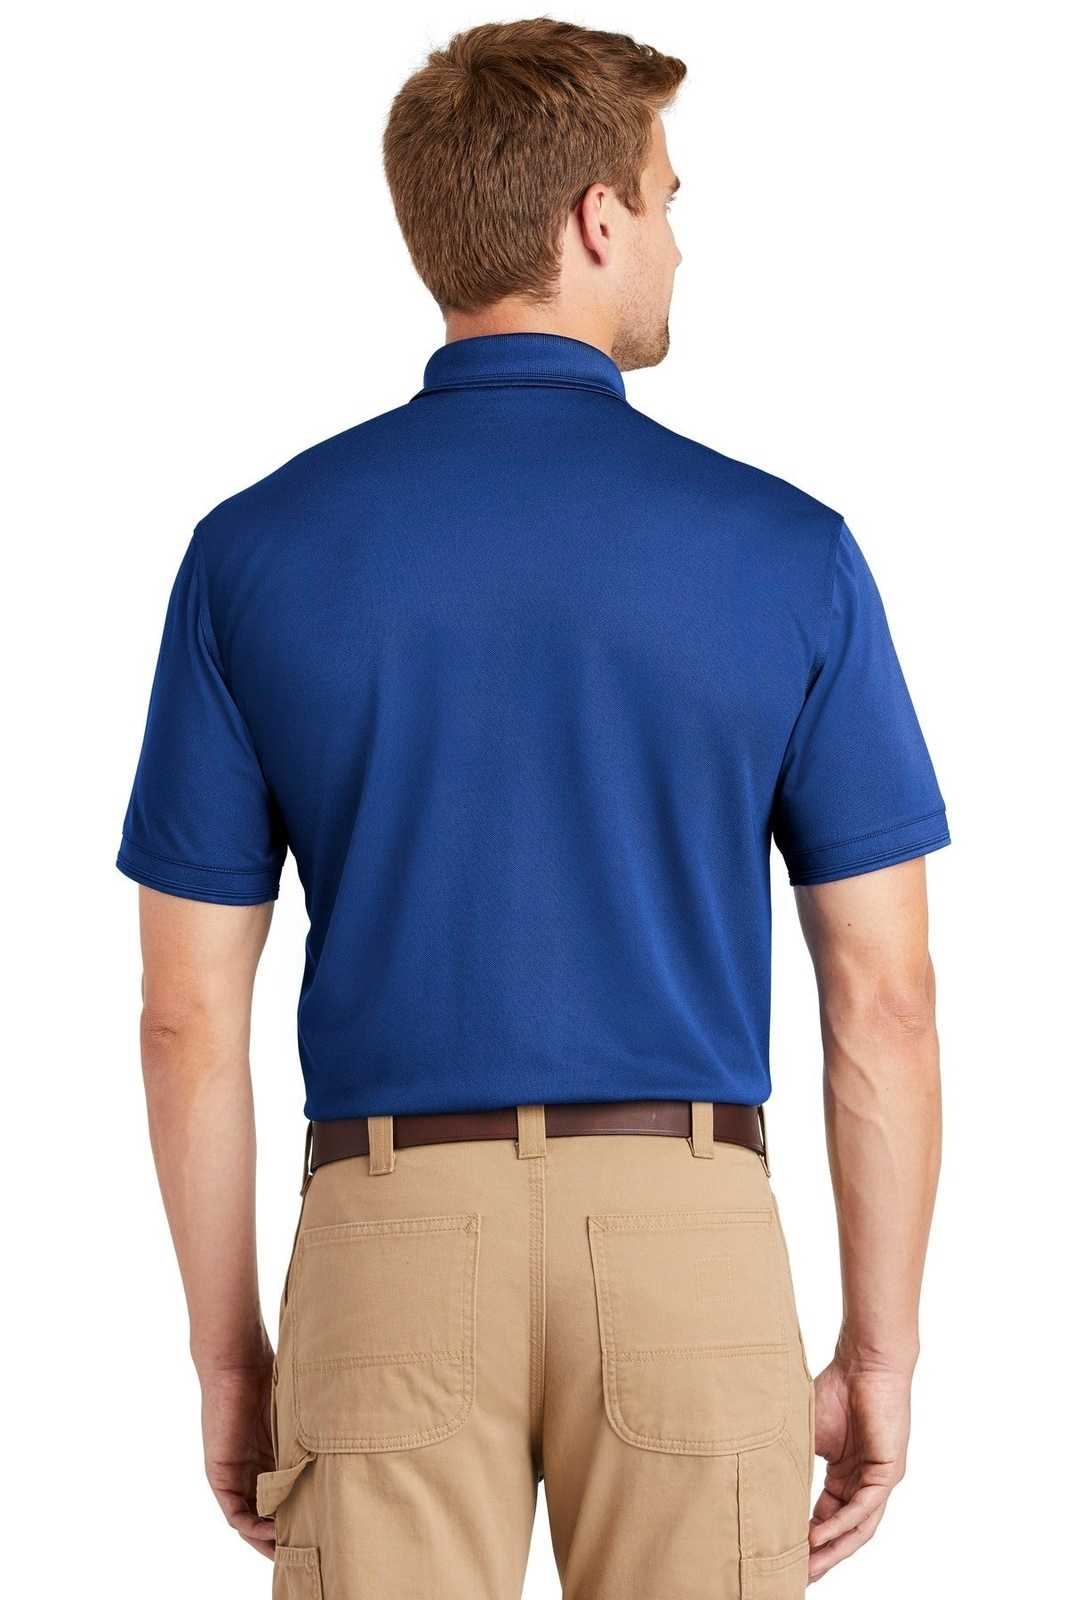 CornerStone CS4020 Industrial Snag-Proof Pique Polo - Royal - HIT a Double - 1